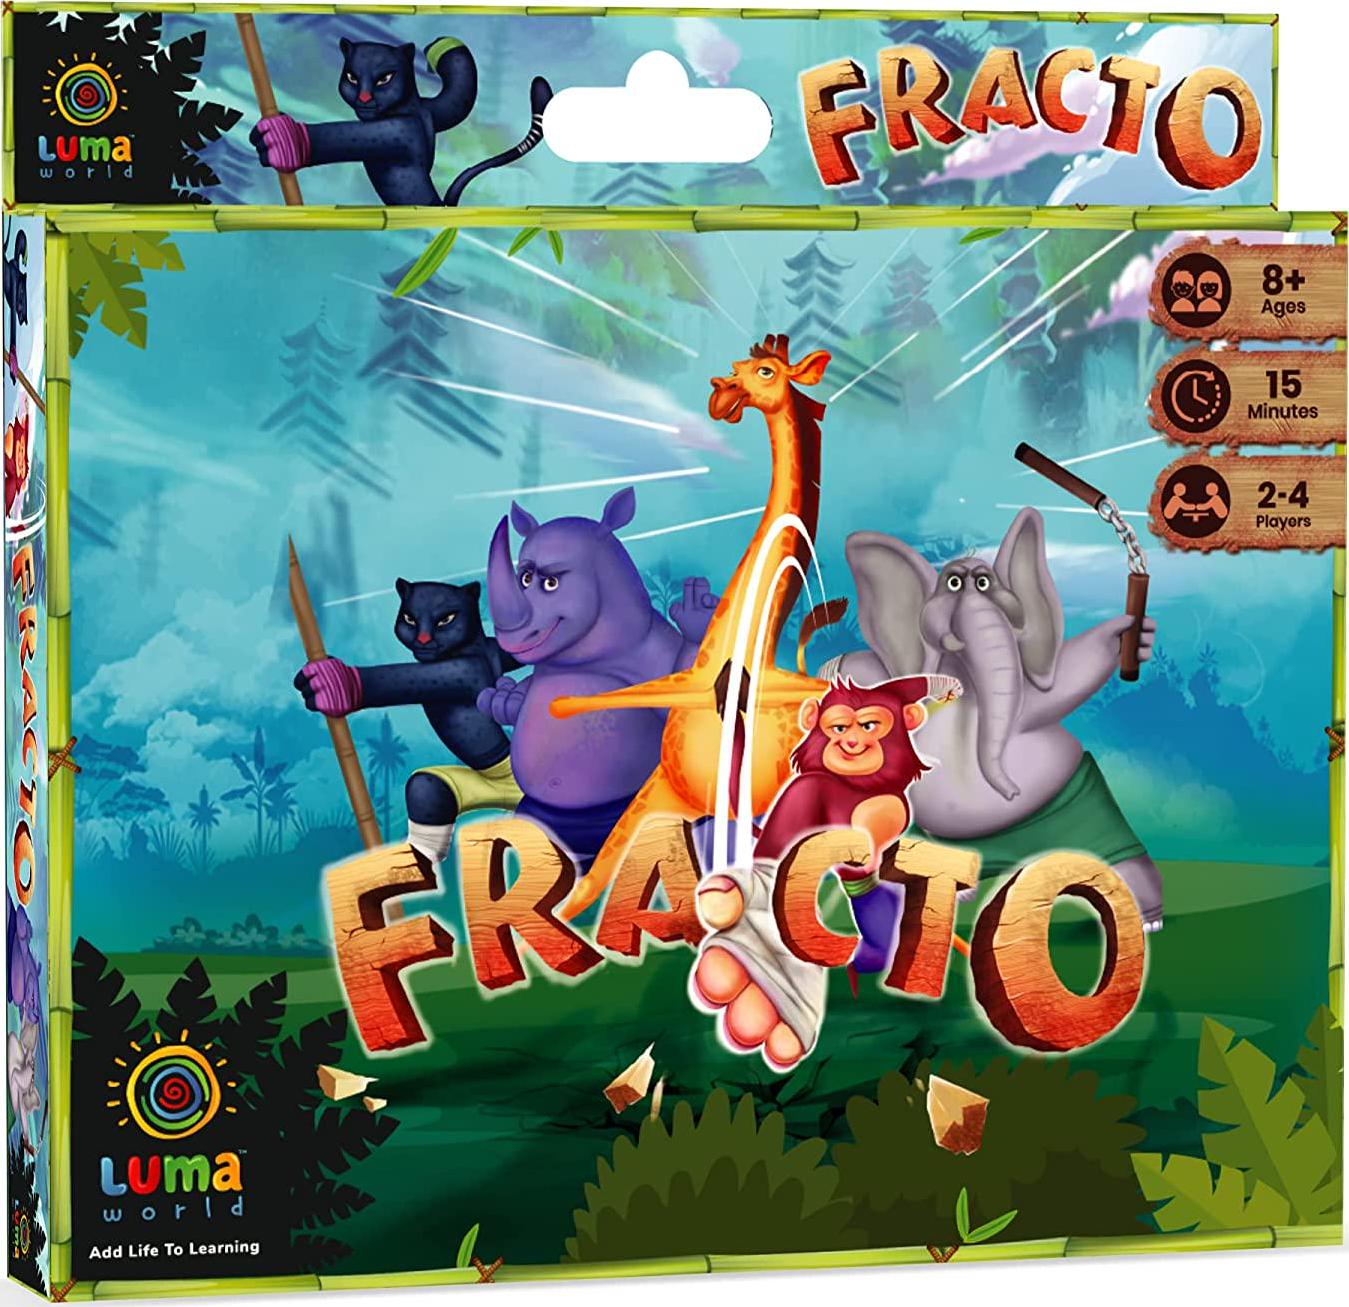 LUMA WORLD ADD LIFE TO LEARNING, Luma World Educational Card Game for Ages 8 and Up: Fracto | 3-Games-in-1 Pack to Learn Fractions, Mental Maths, Memory and Communication | Visual and Number Cards for Conceptual Clarity (80 Cards)